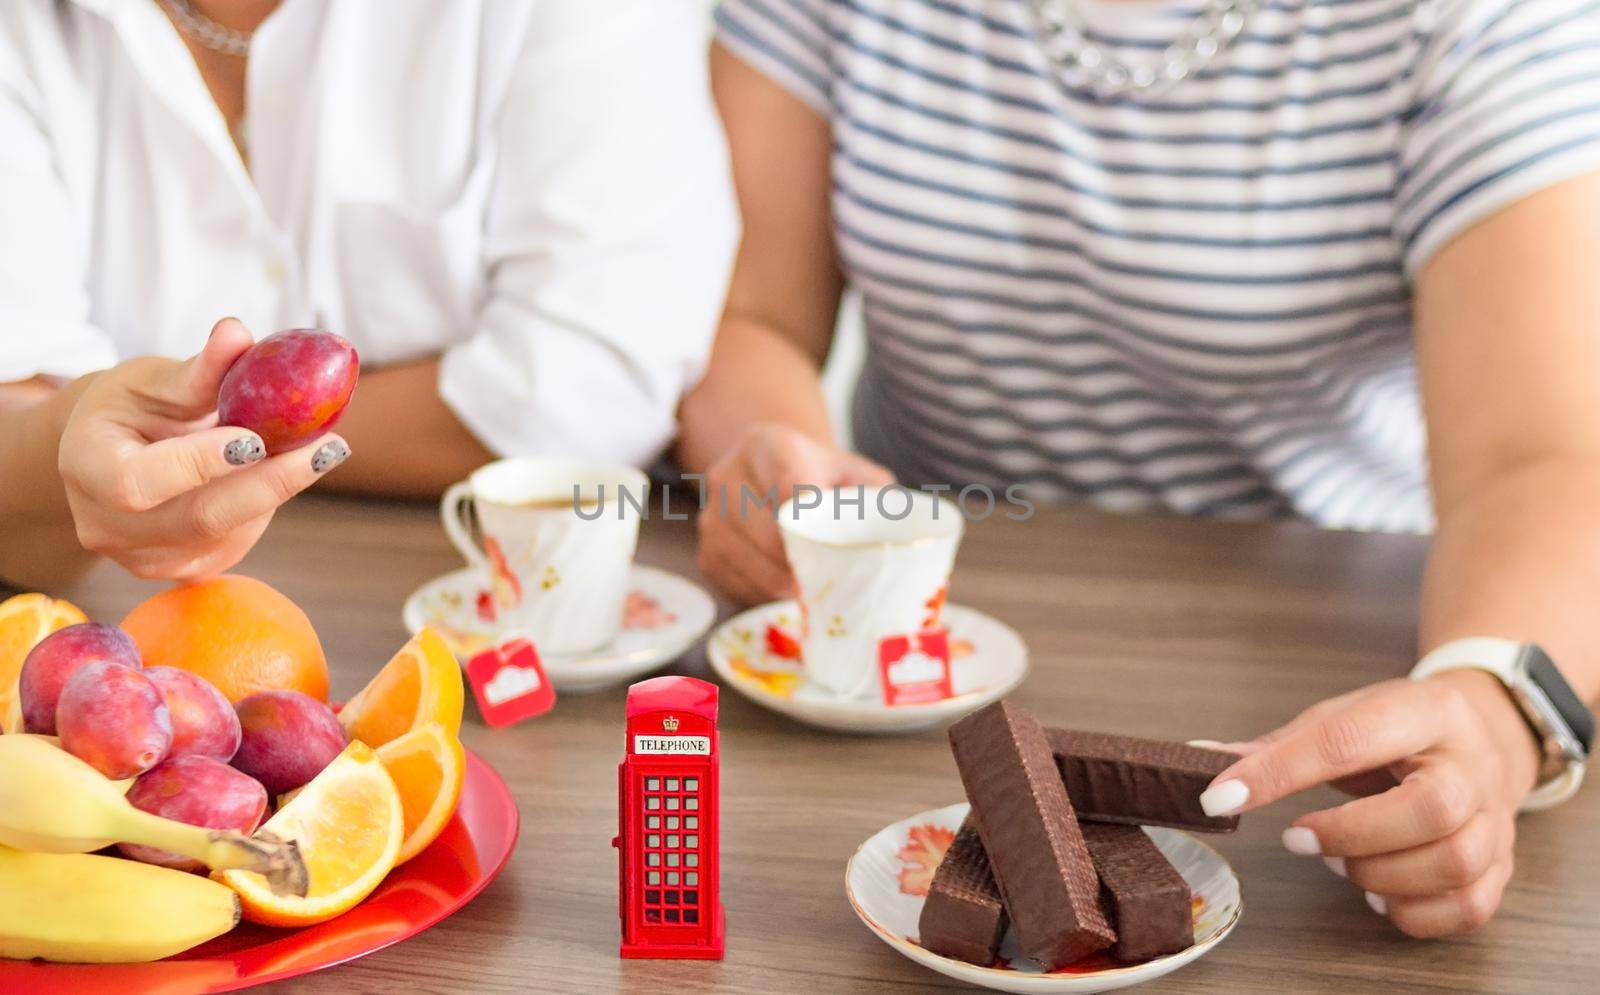 Traditional afternoon tea of british ceremony with such symbol of britishness as toy telephone box, defocused faceless women on background, front focus